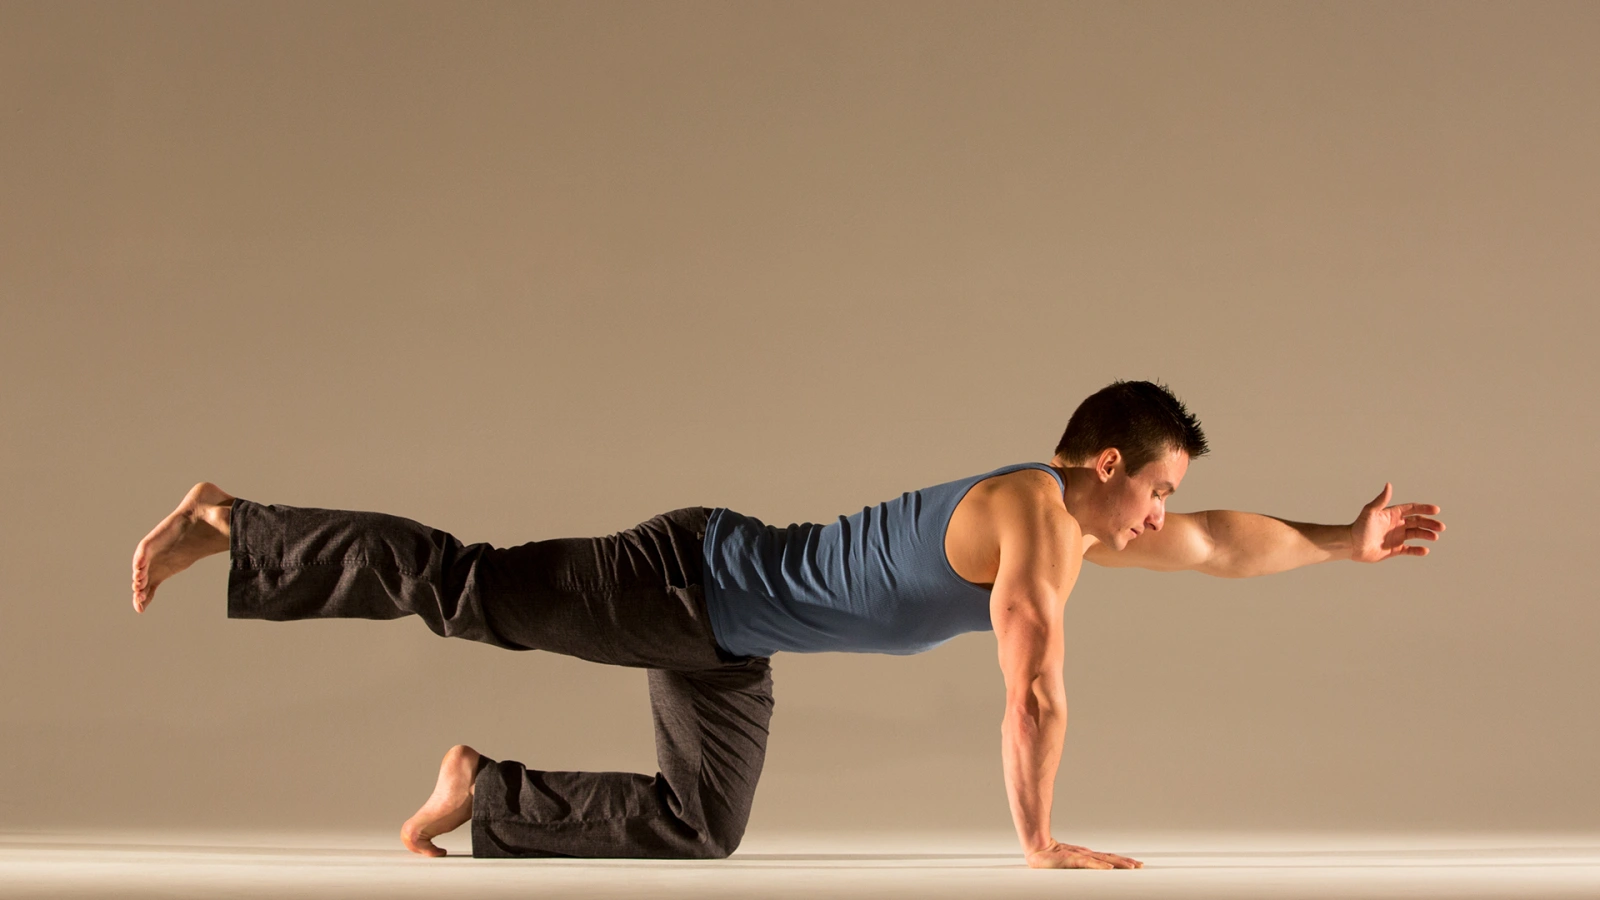 Best Poses for Building Muscle with Yoga